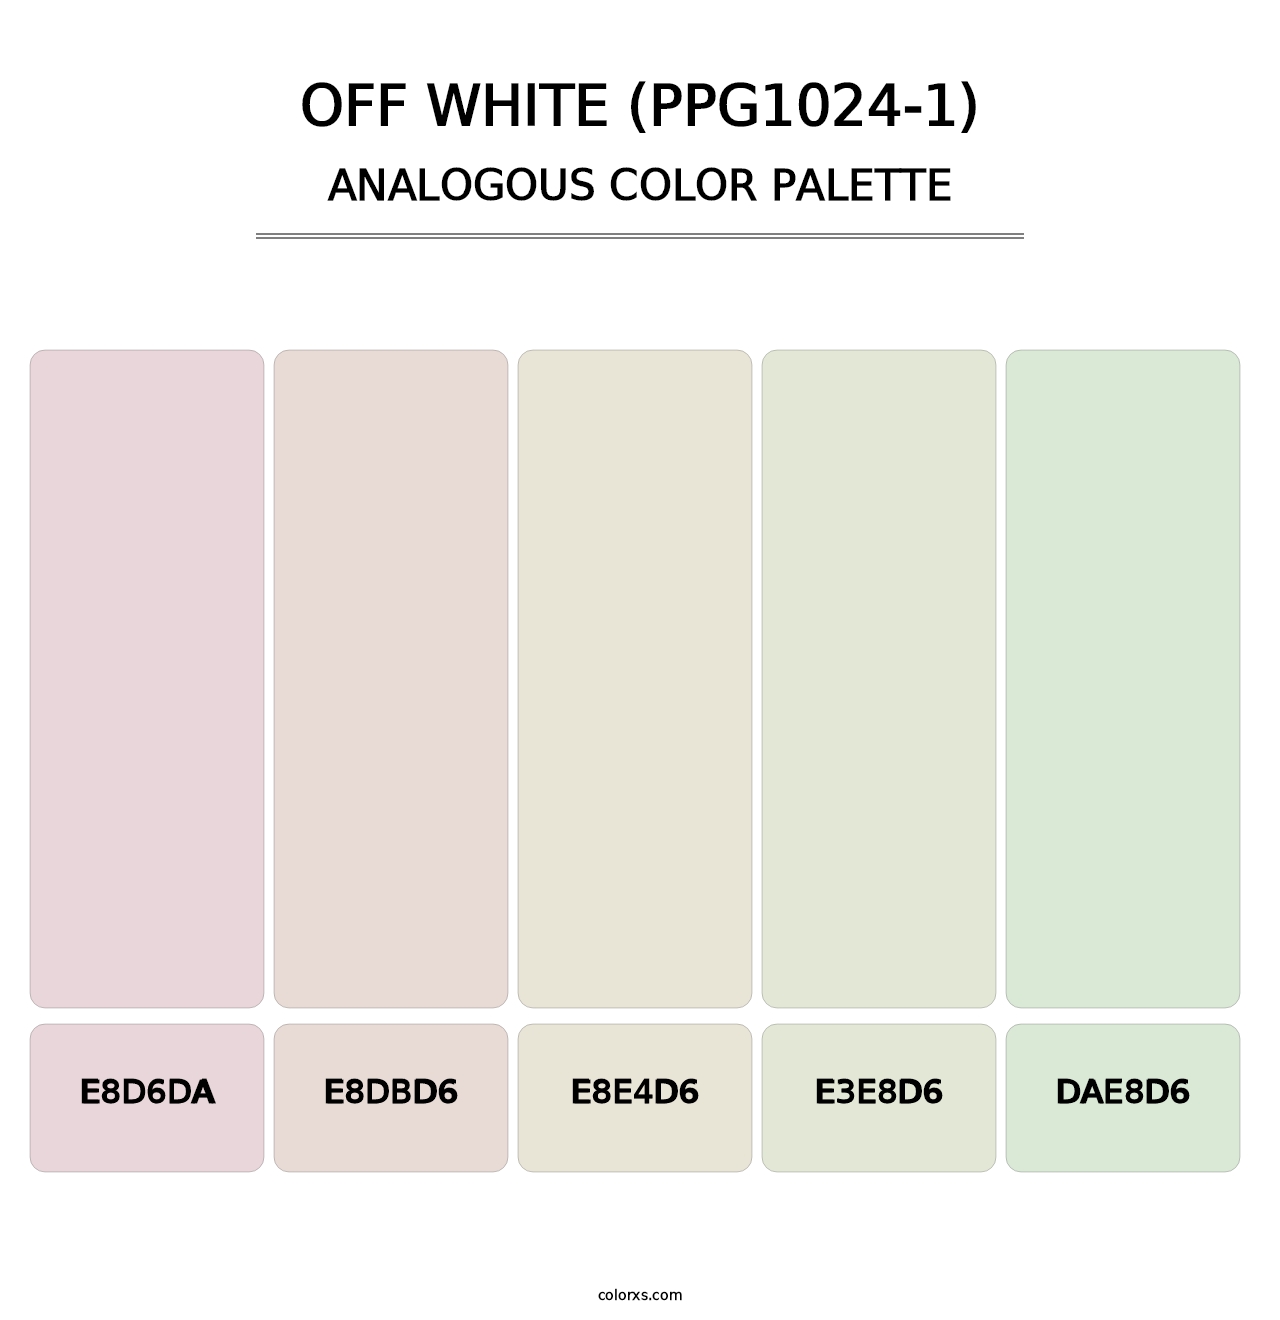 Off White (PPG1024-1) - Analogous Color Palette